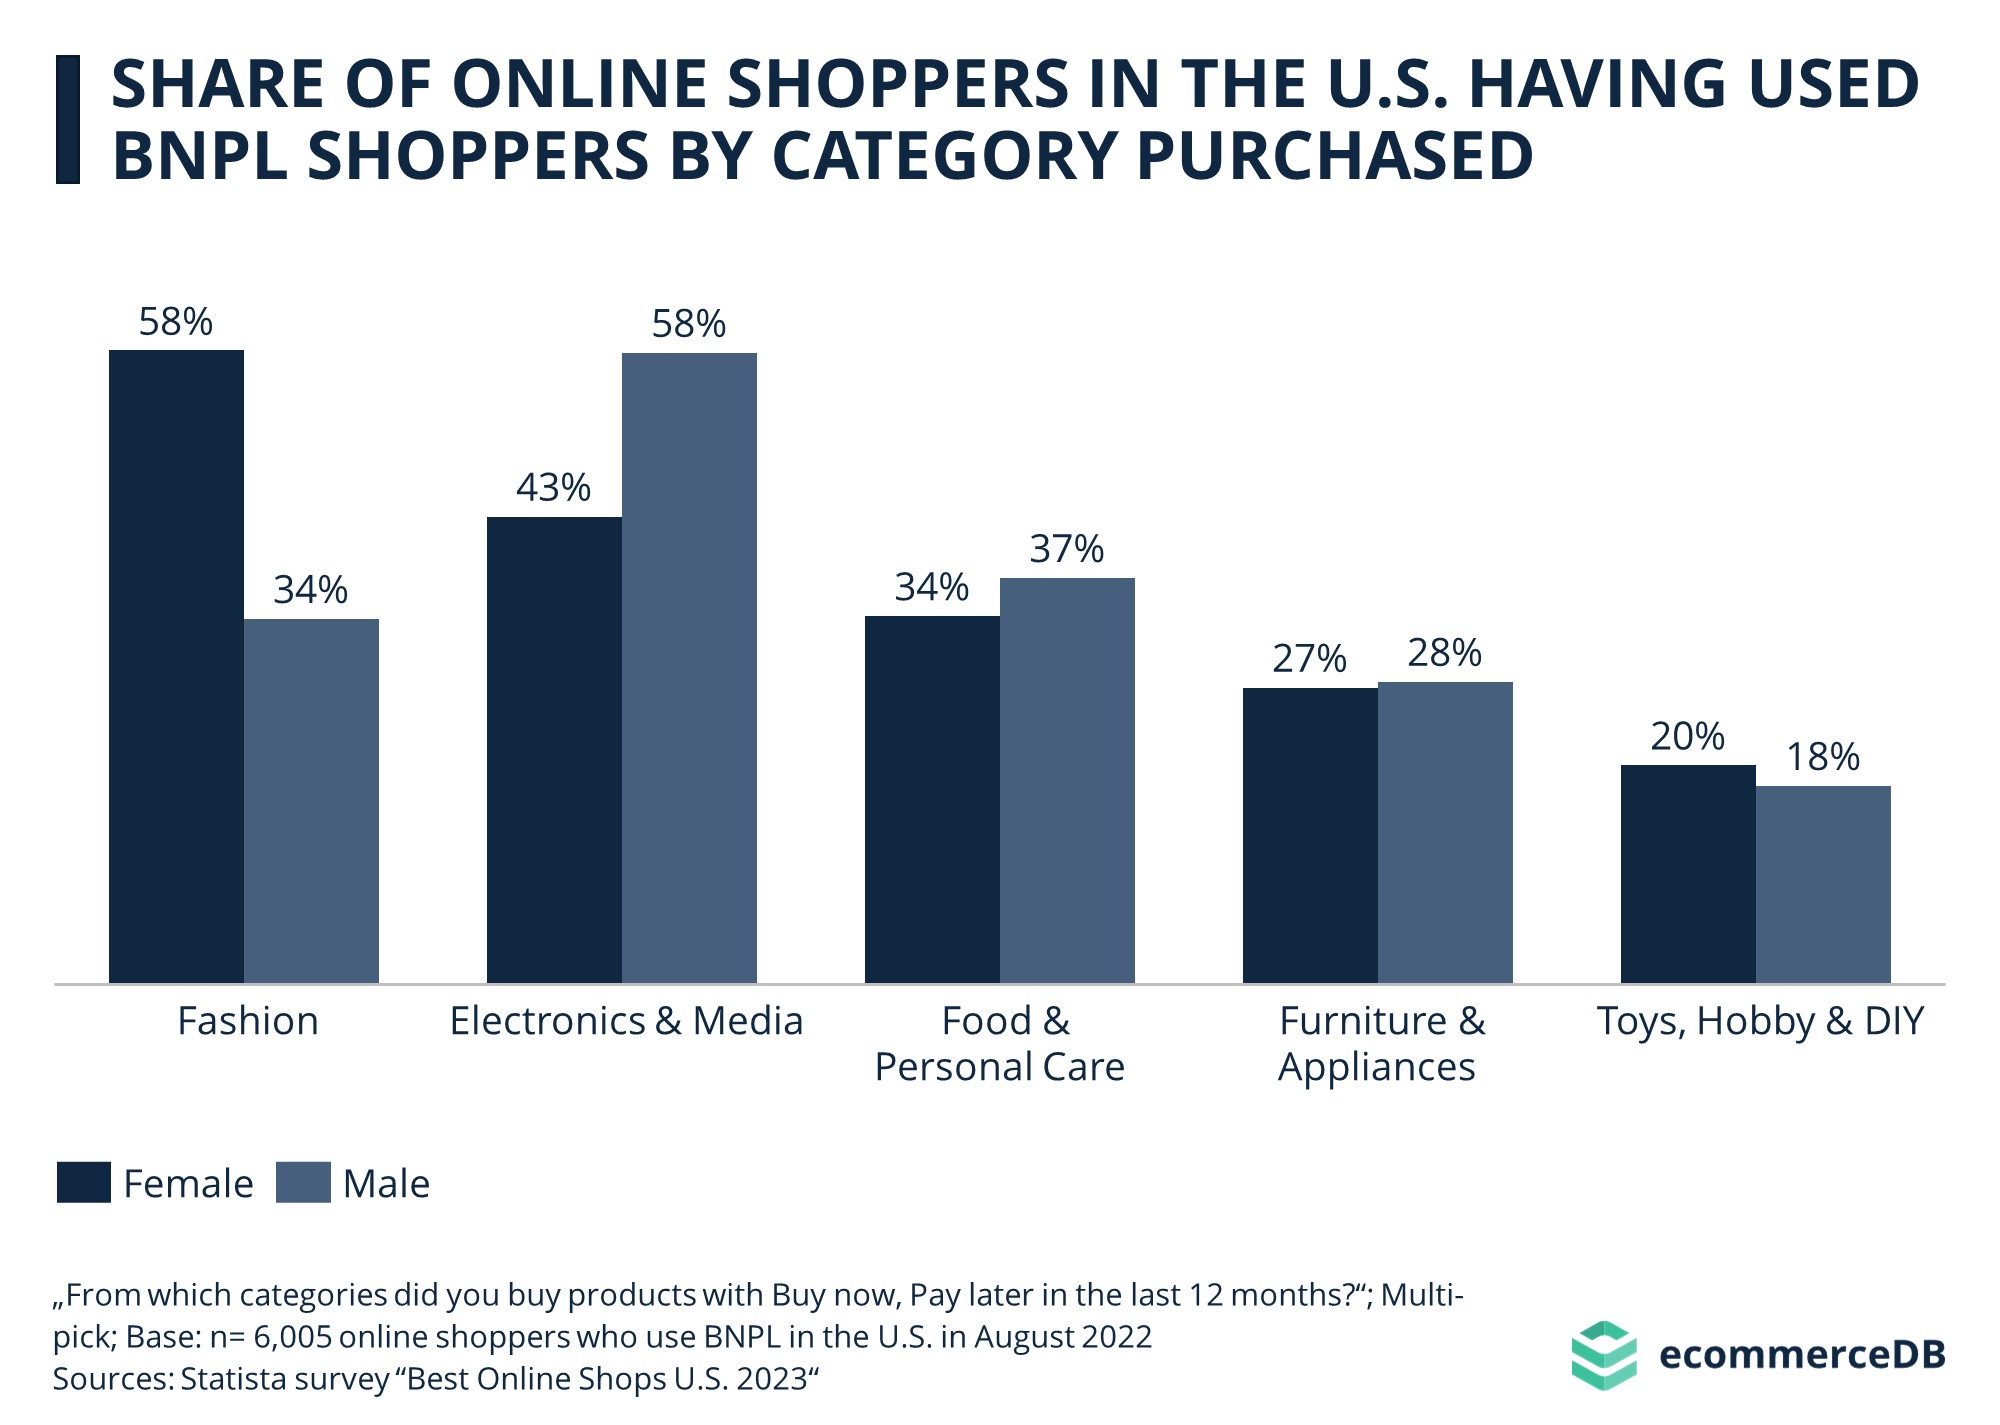 Share of Online Shoppers in the U.S. Having Used BNPL Shoppers by Category Purchased